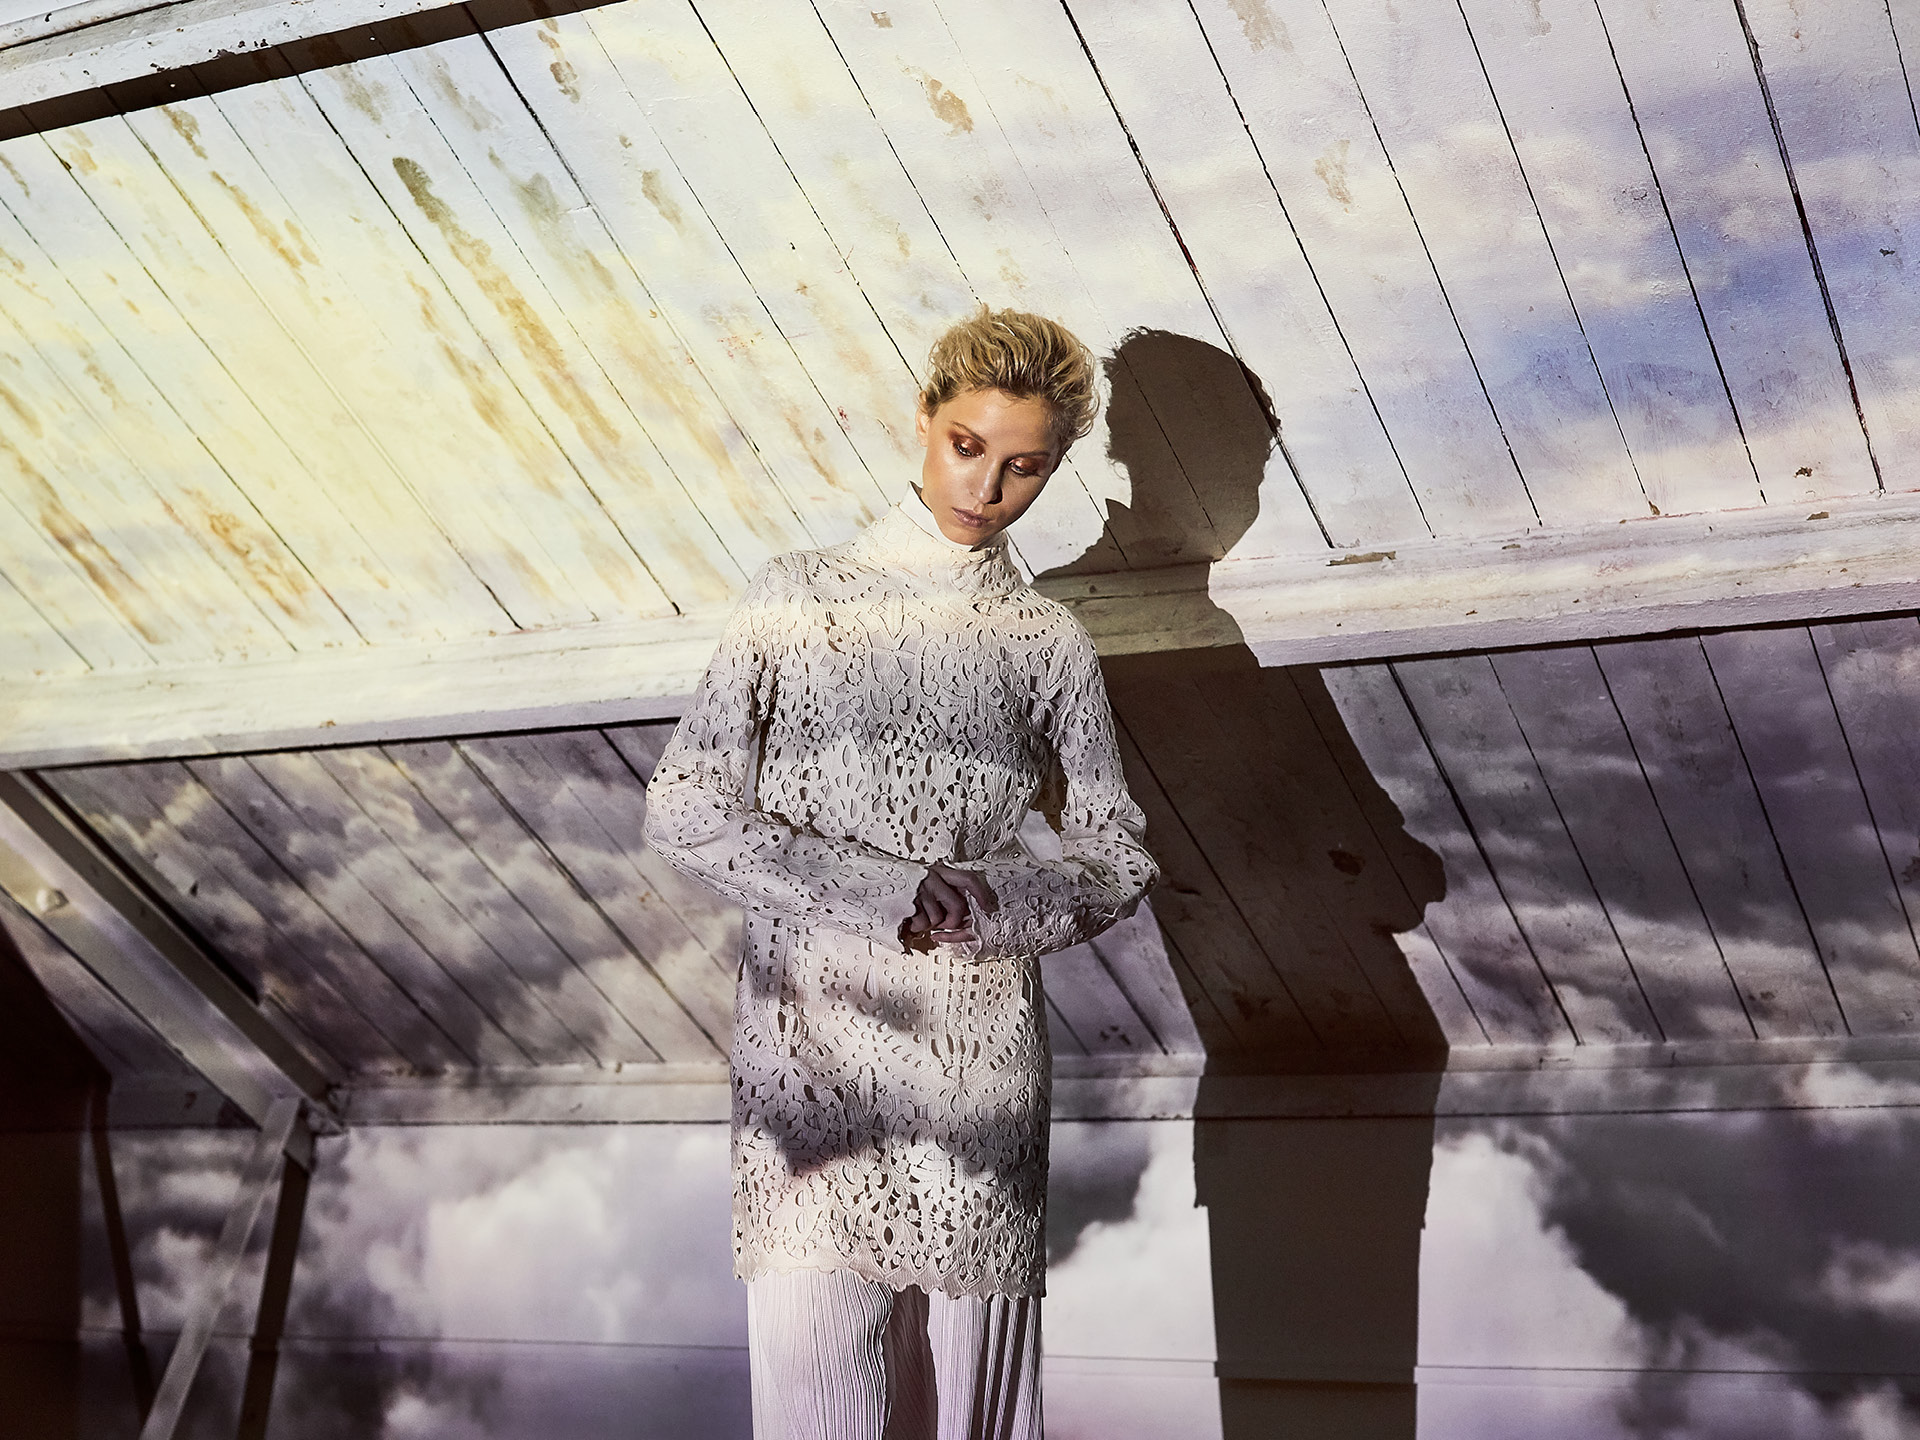 Scandinavian looking white model wearing white and beige clothing standing hunched beneath a slanted wooden ceiling